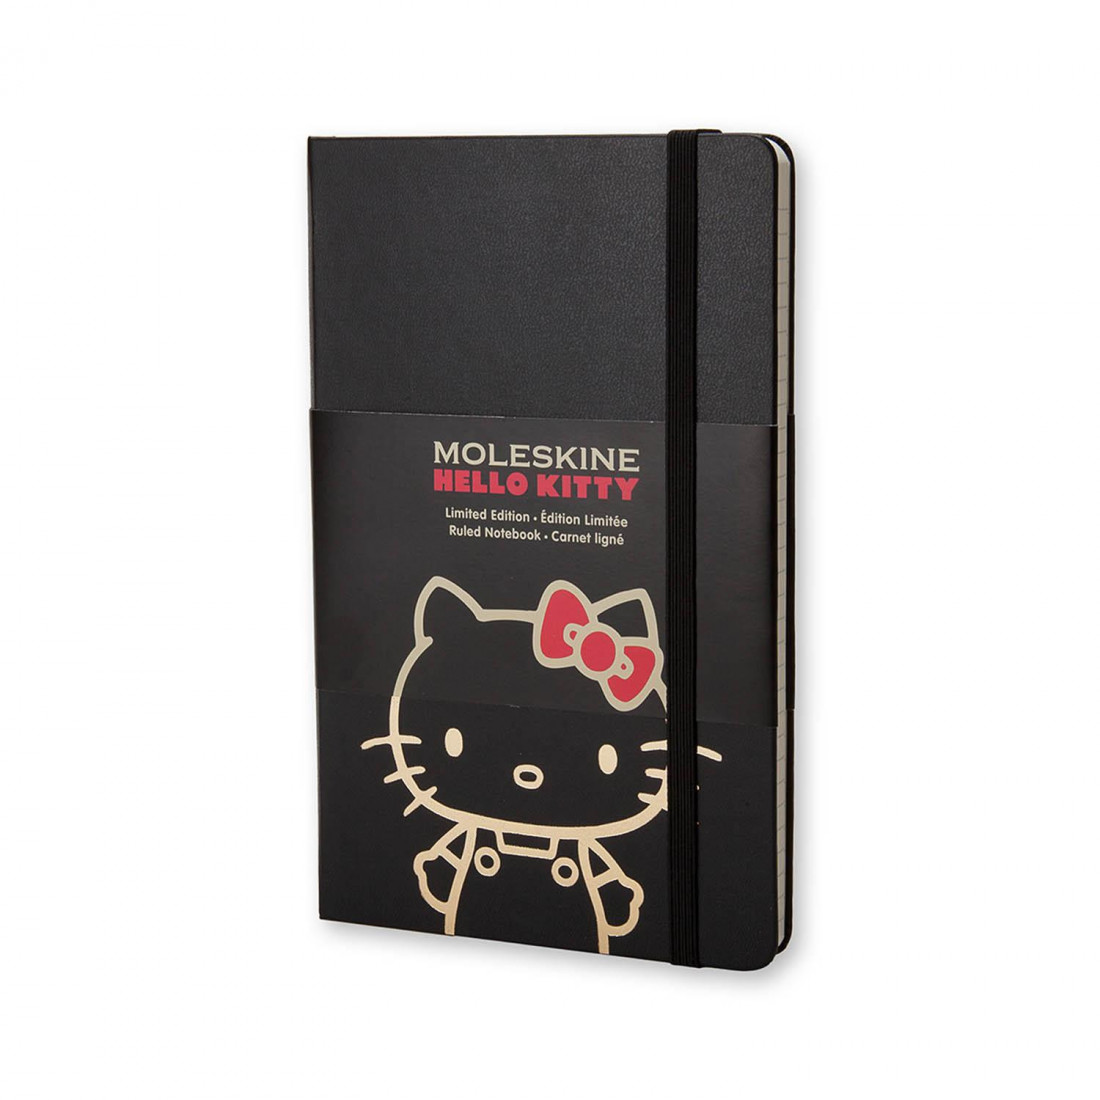 Notebook Large Limited Edition Hello Kitty Black Ruled Hard Cover 13x21 Moleskine